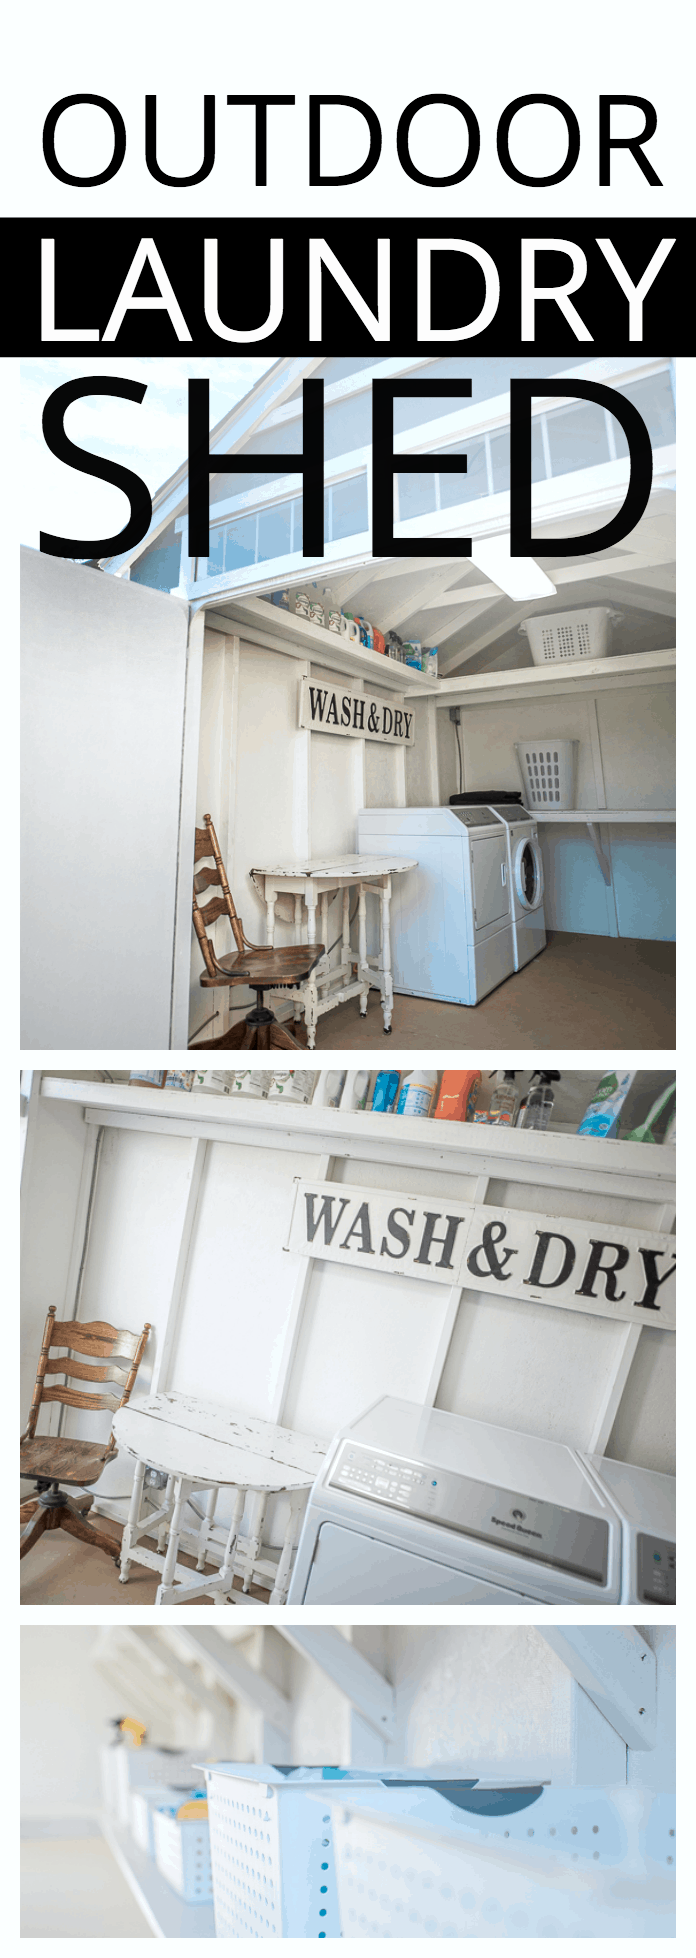 An outdoor laundry shed can free up space indoors AND keep the kids from tracking muddy clothes into the house